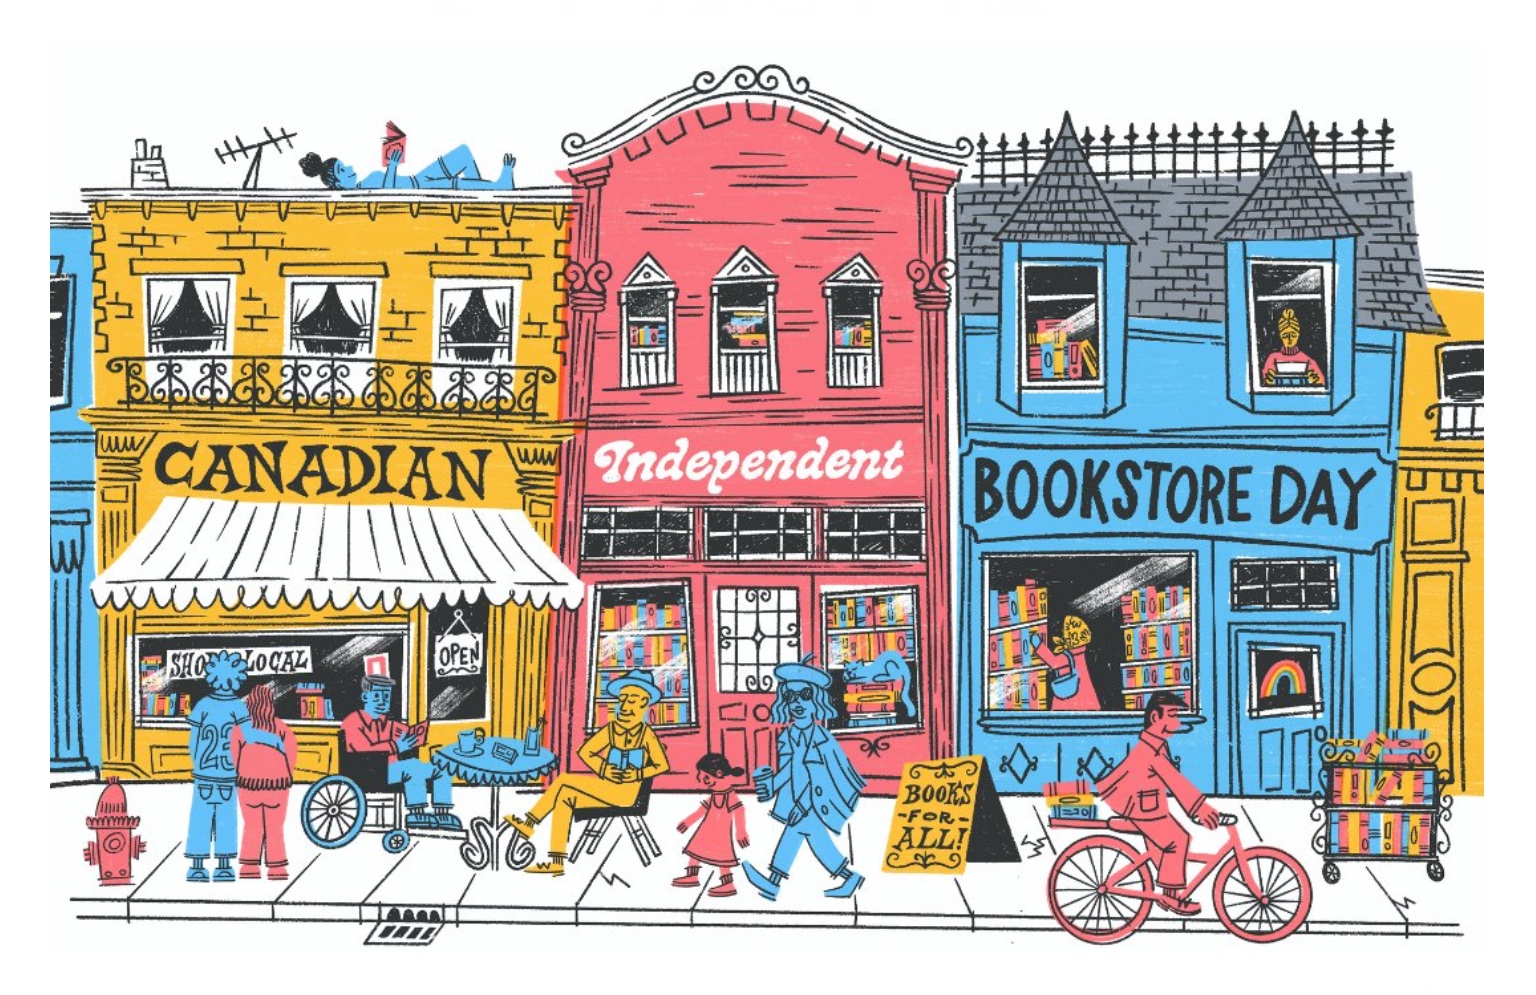 a brightly coloured illustration of a busy sidewalk with three bookstores on the street. Signs on the stores say "Canadian Independent Bookstore Day"